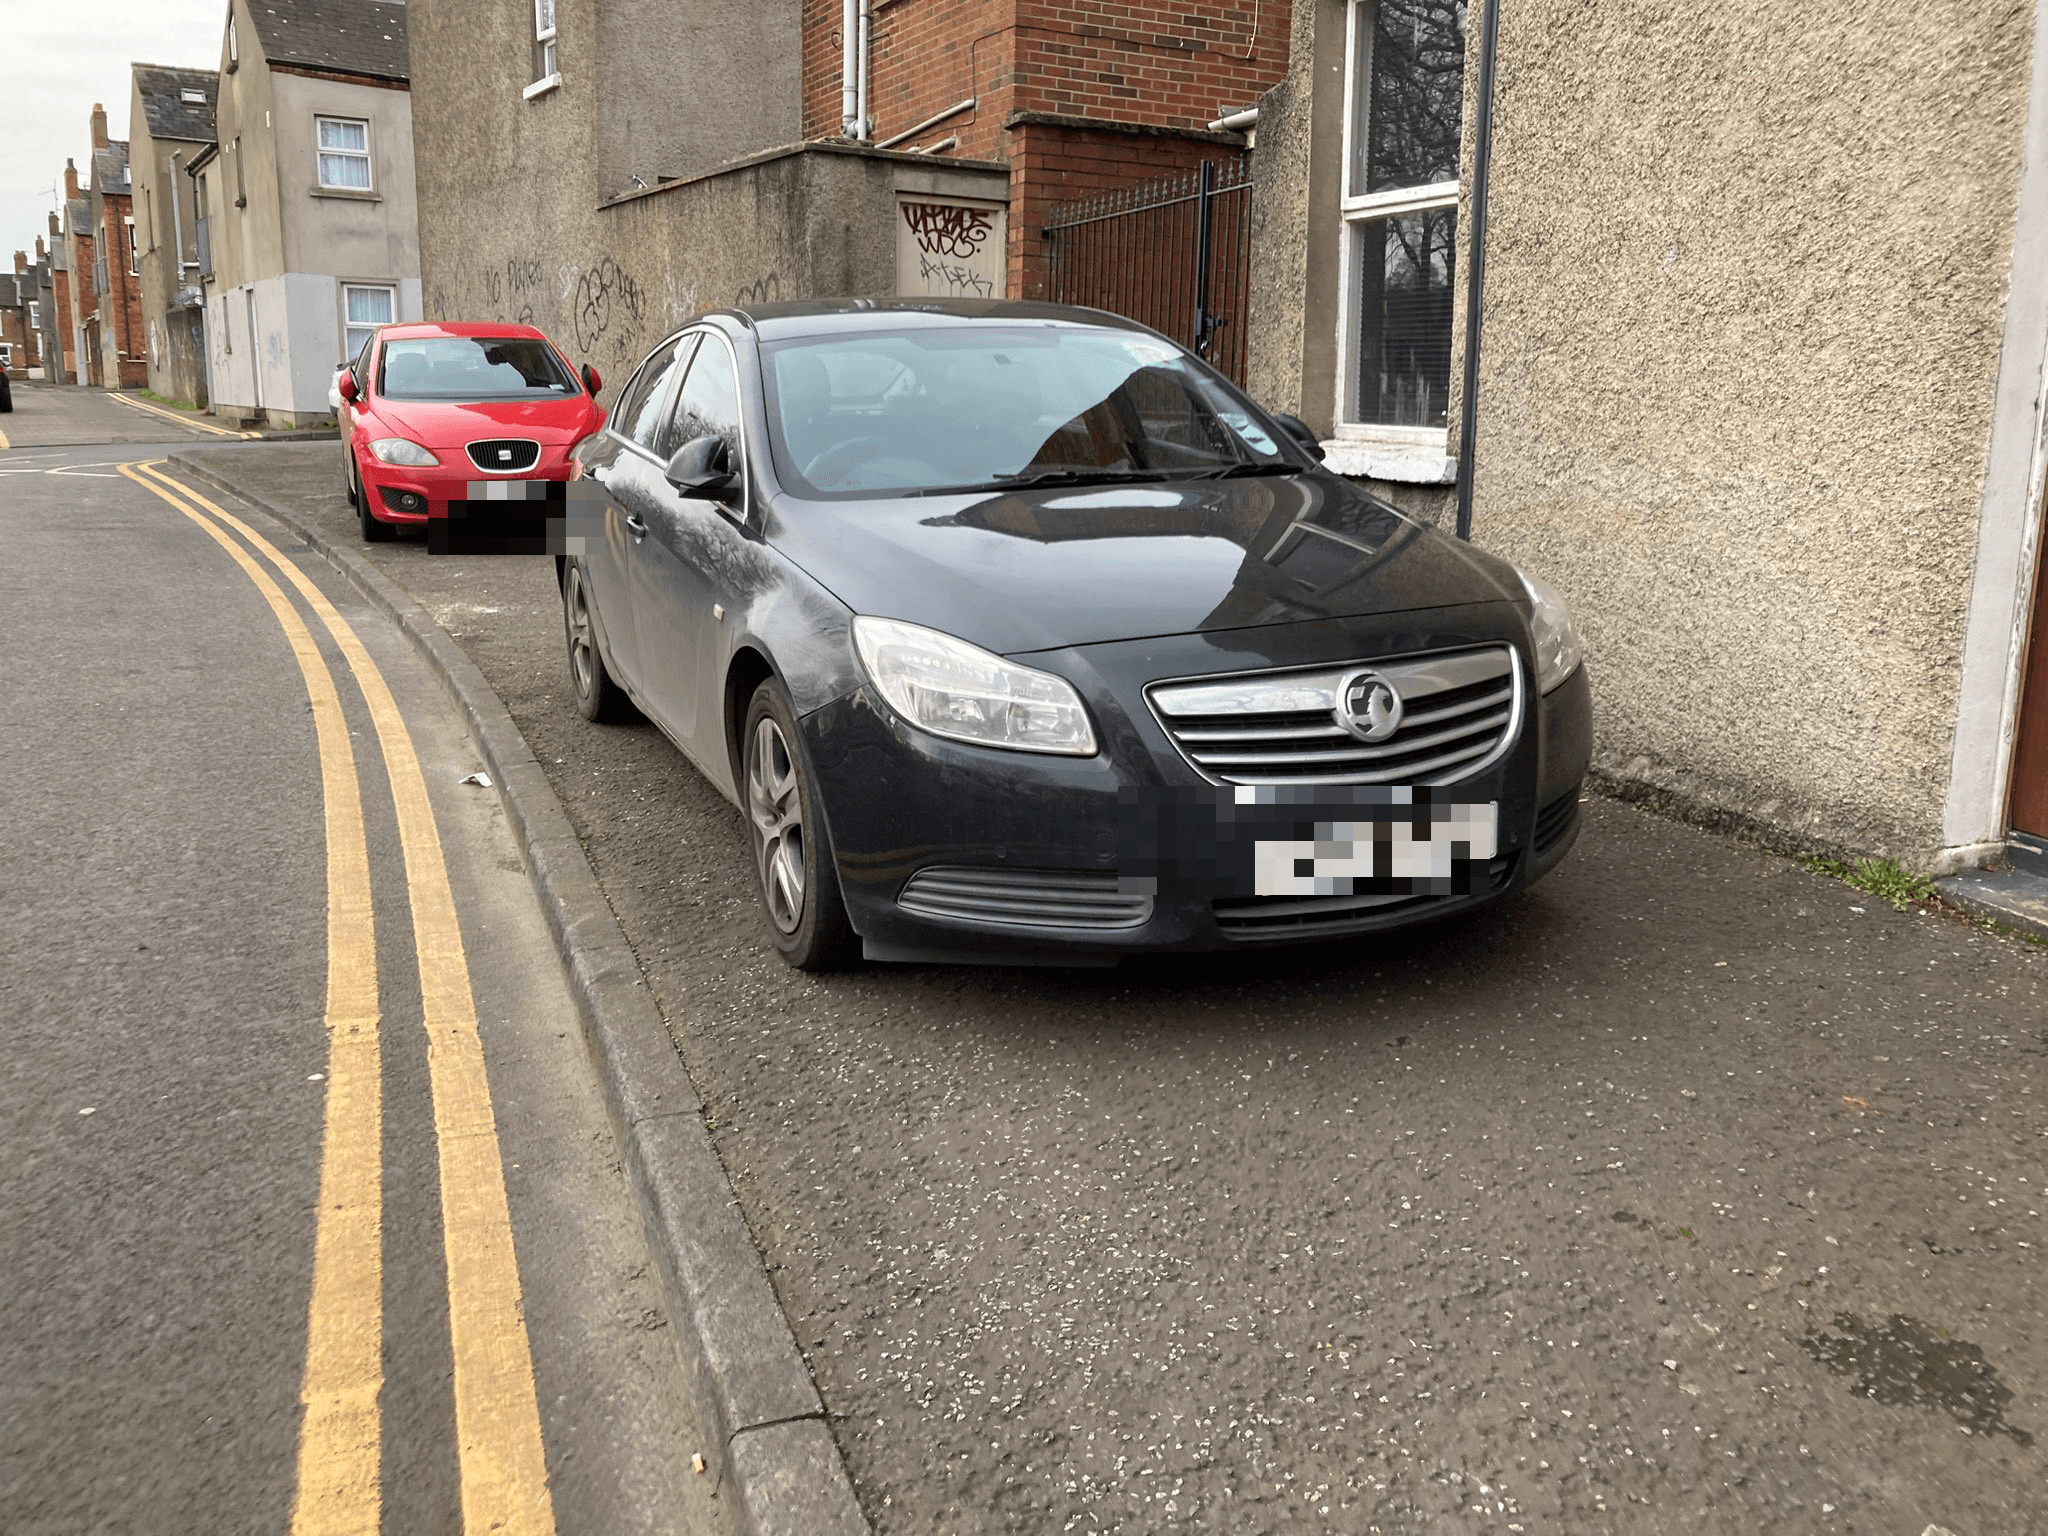 NO WAY THROUGH: Drivers in the Holyland have been parking on the pavement and ignoring double yellow lines 